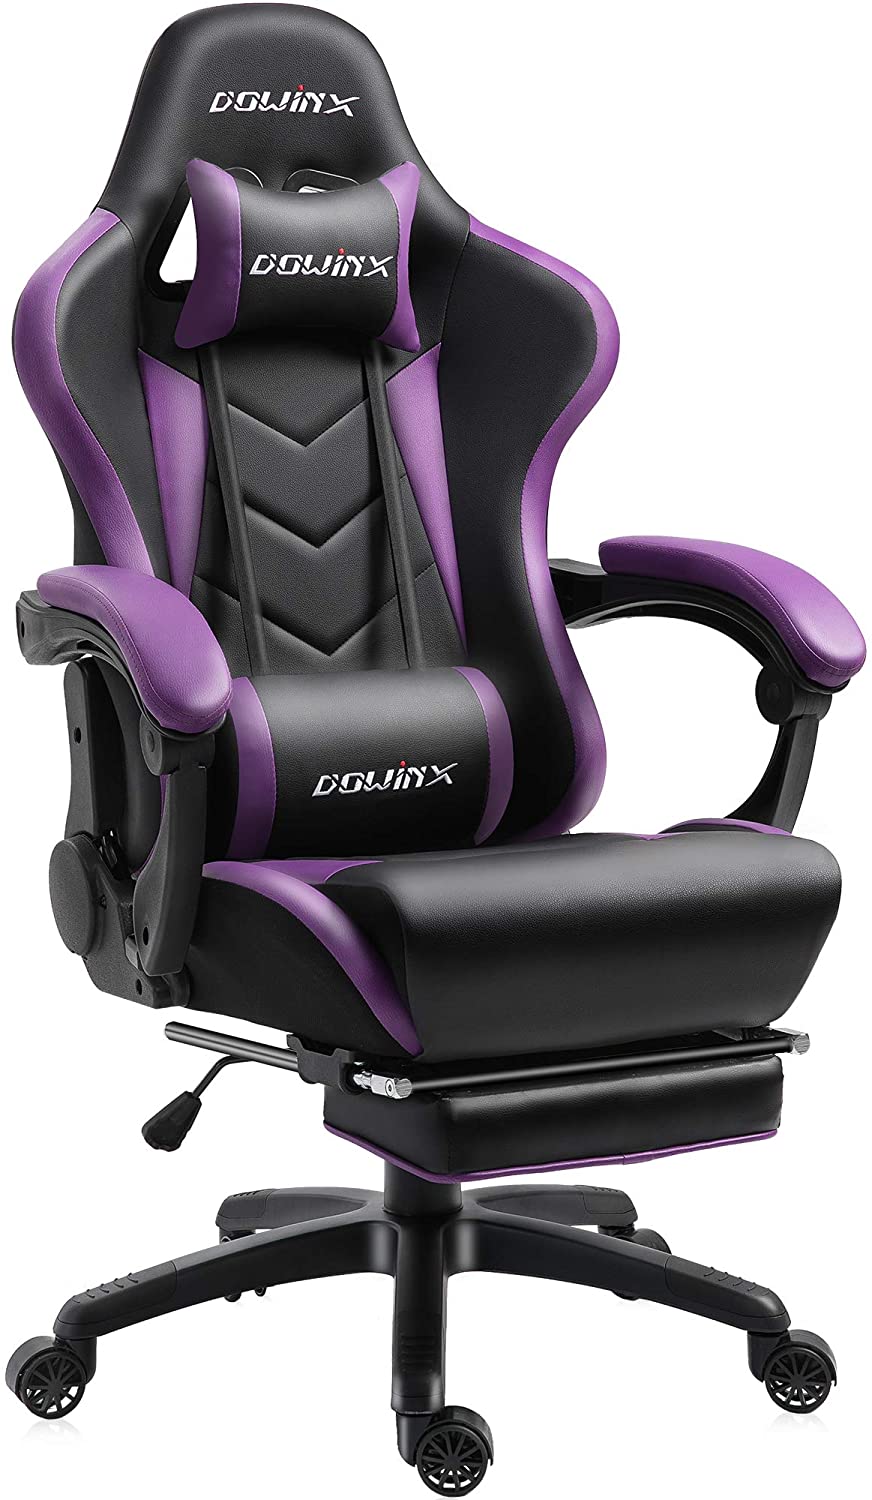 Dowinx Racing Style Gaming Chair 